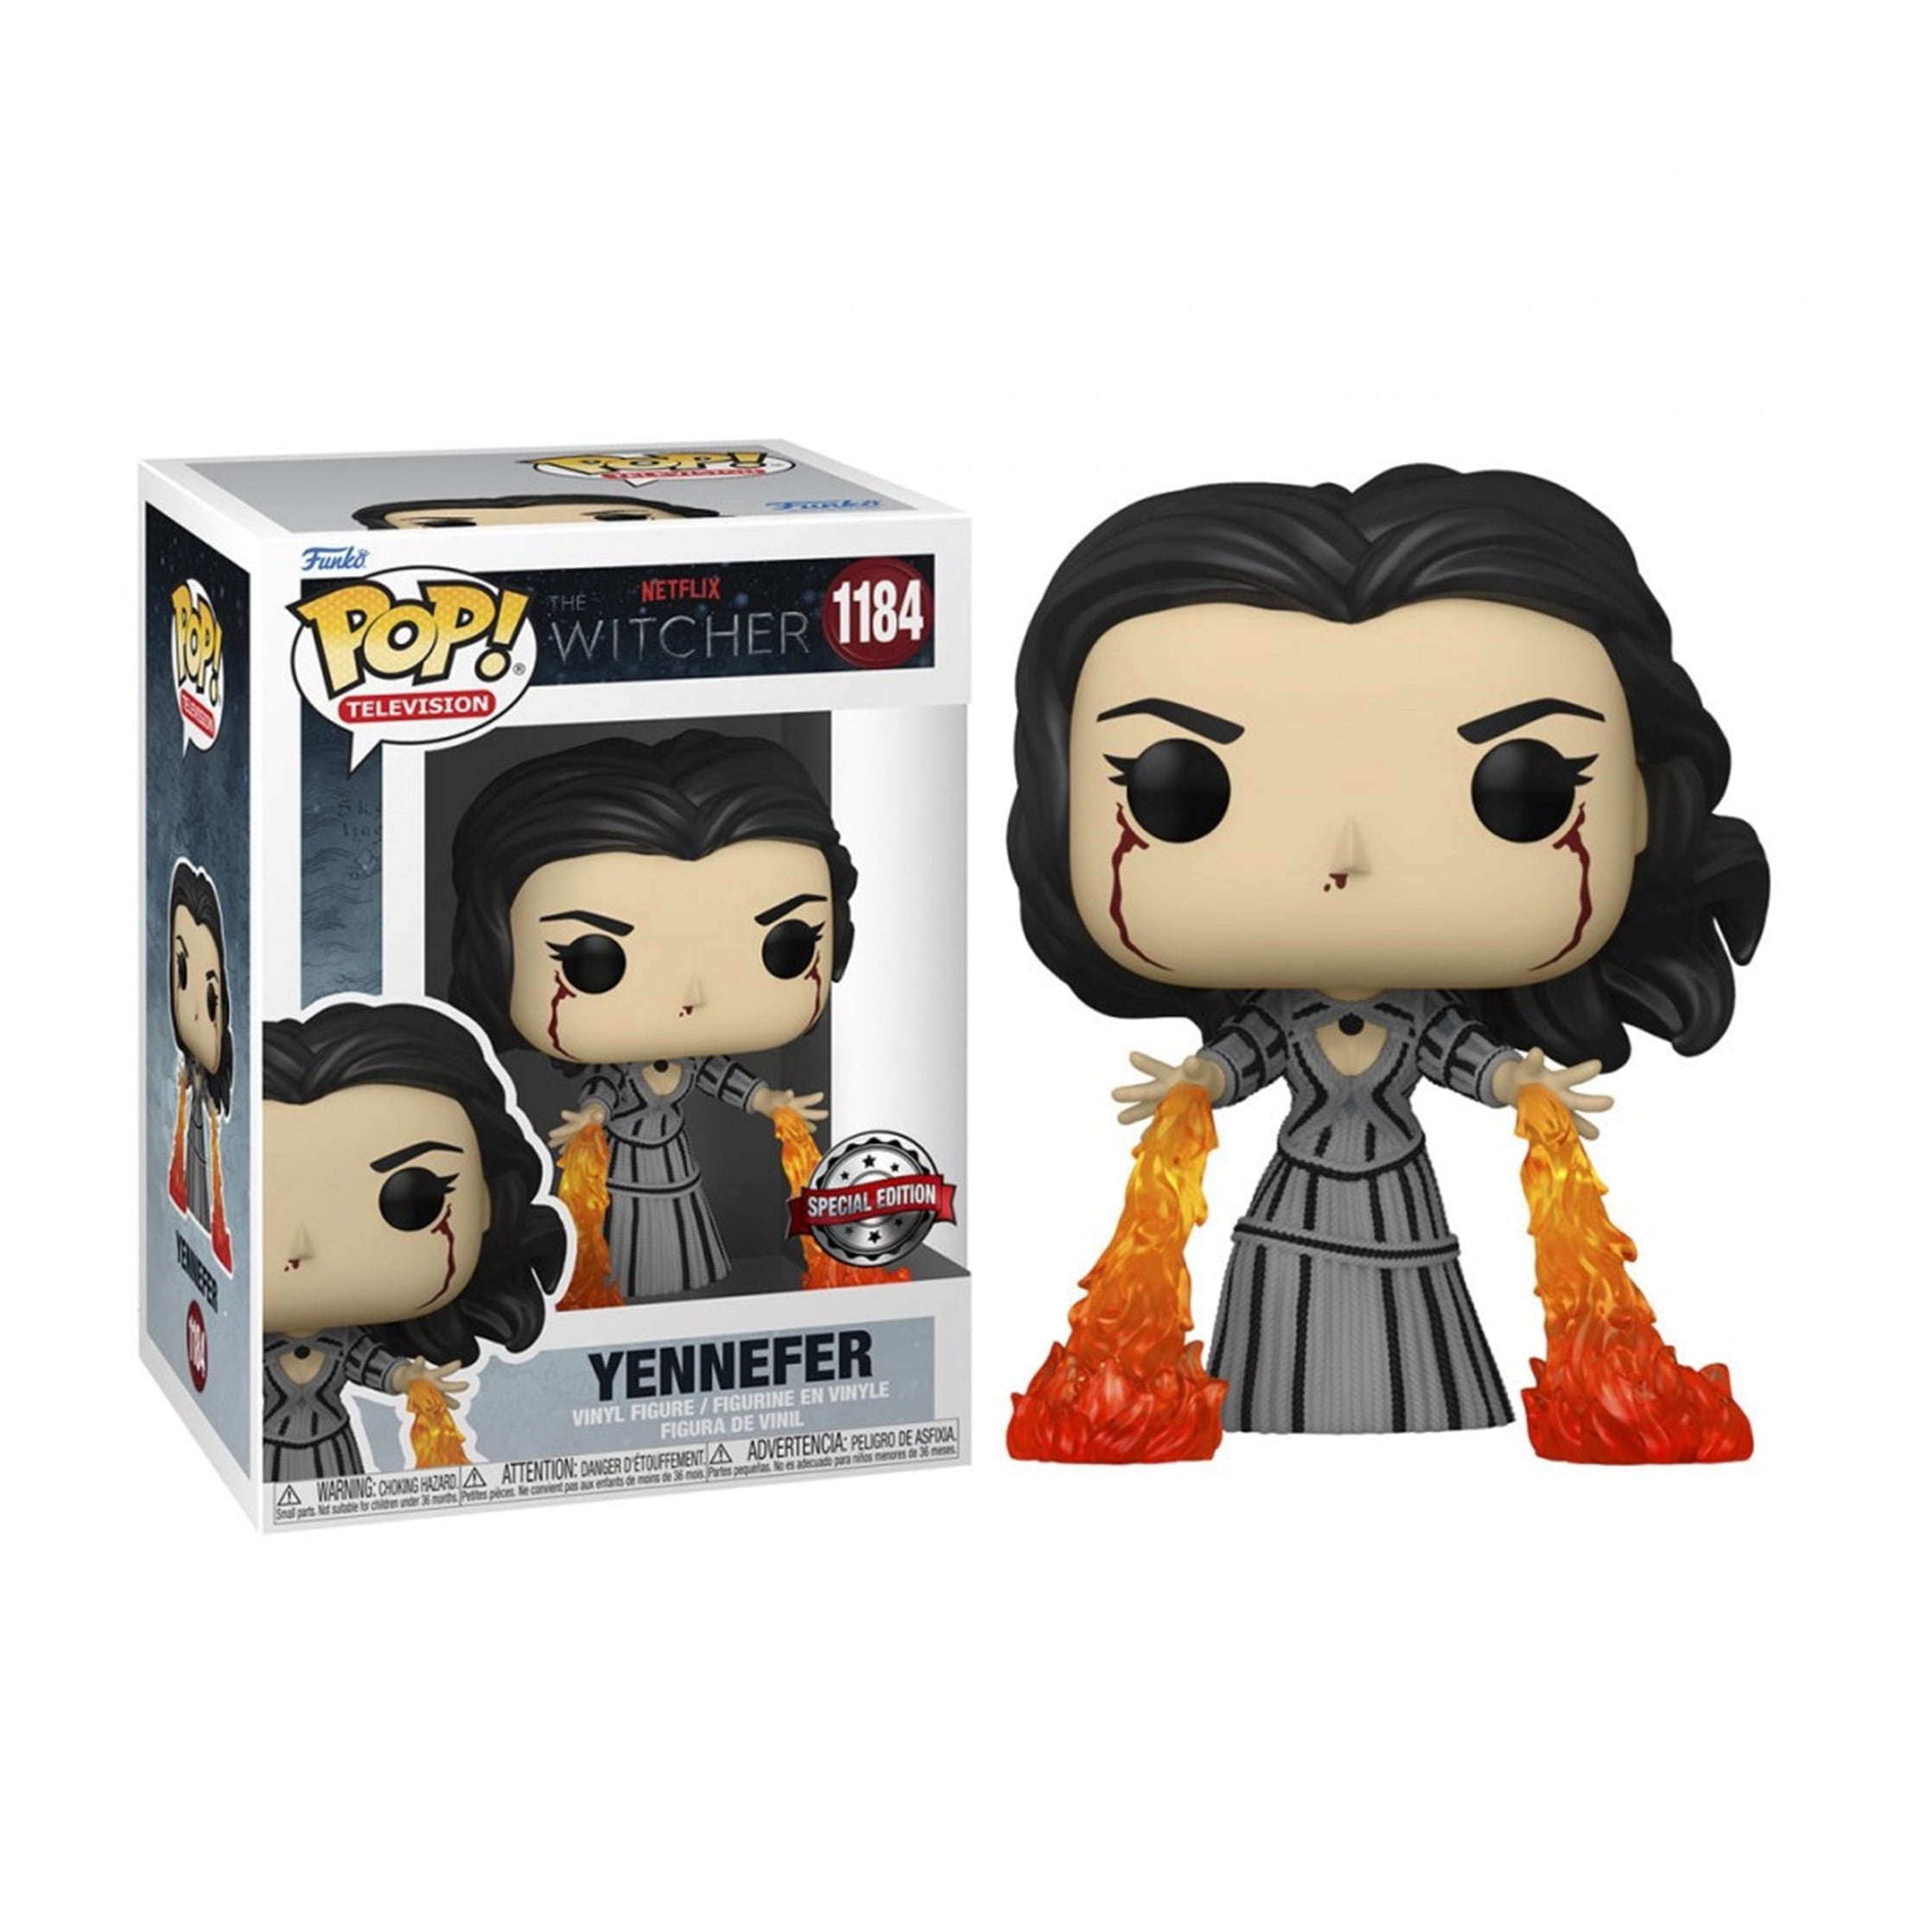 Funko POP! Games The Witcher 2019 Yennefer BAM Exclusive - Walmart.com